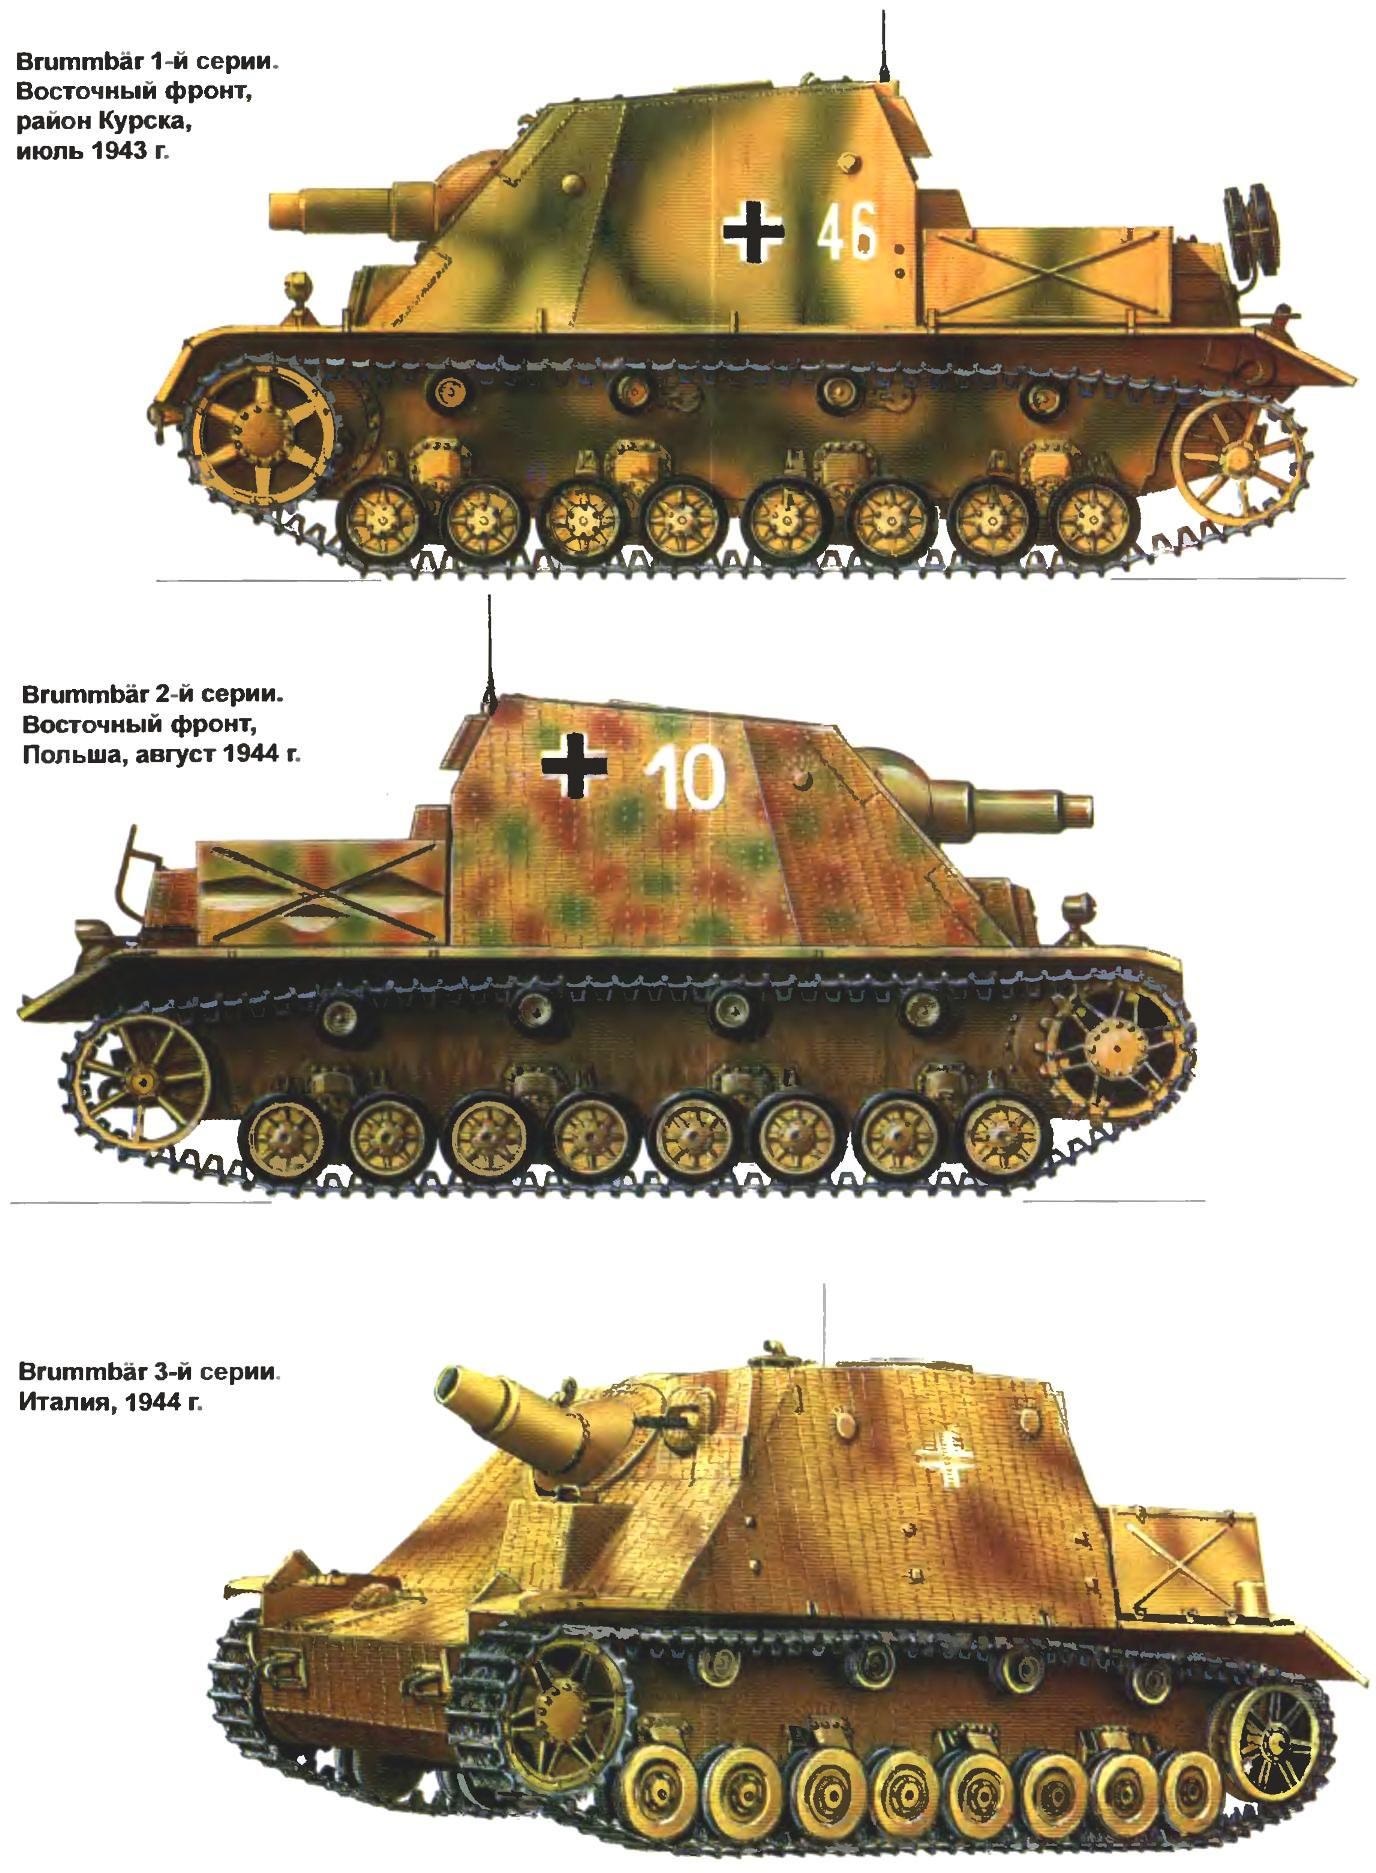 ASSAULT TANKS OF THE WEHRMACHT